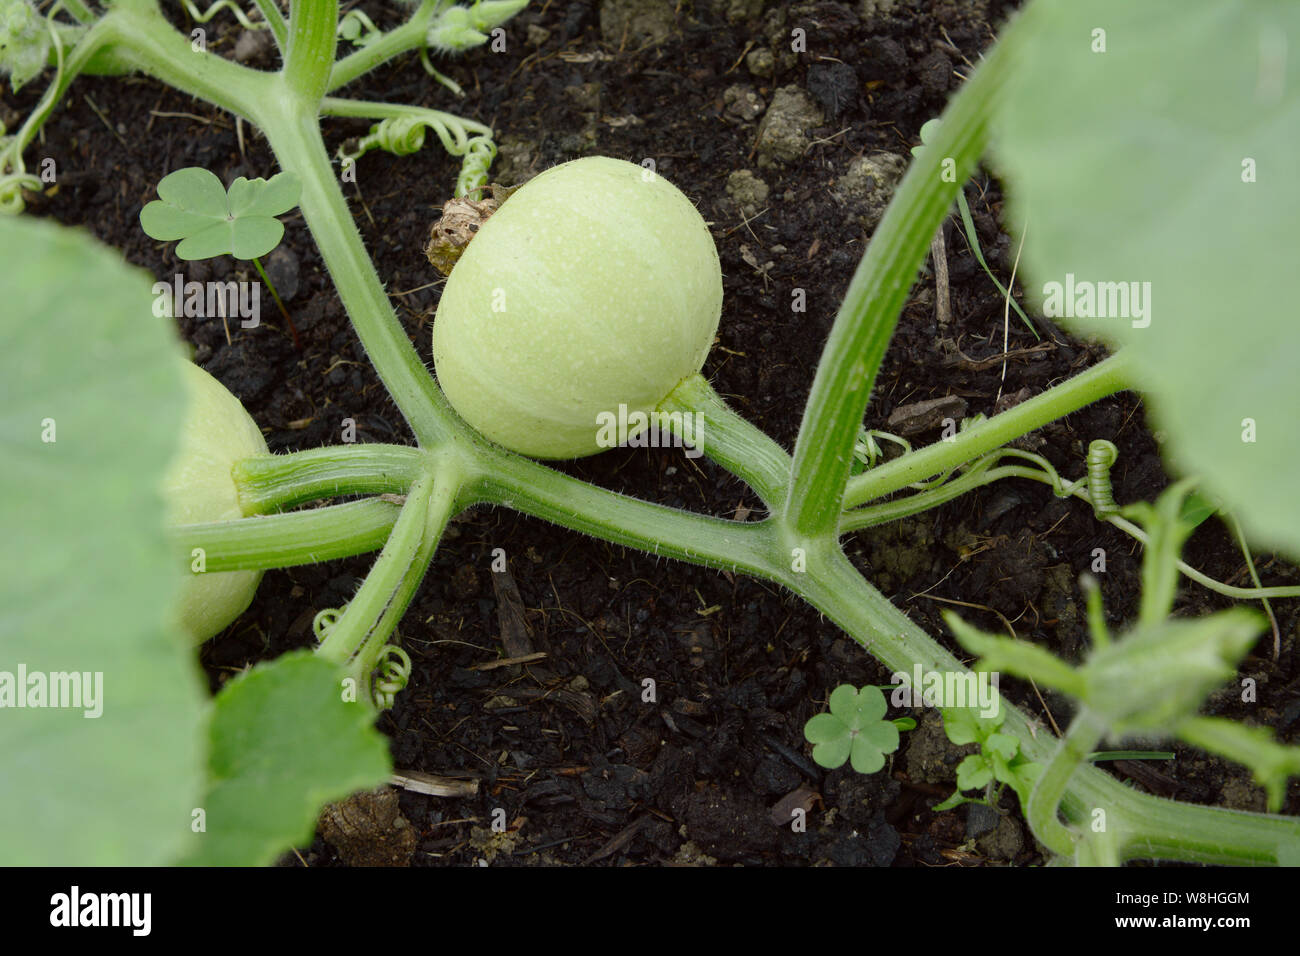 Smooth-skinned, pale green ornamental gourd growing on a prickly vine on dark compost Stock Photo